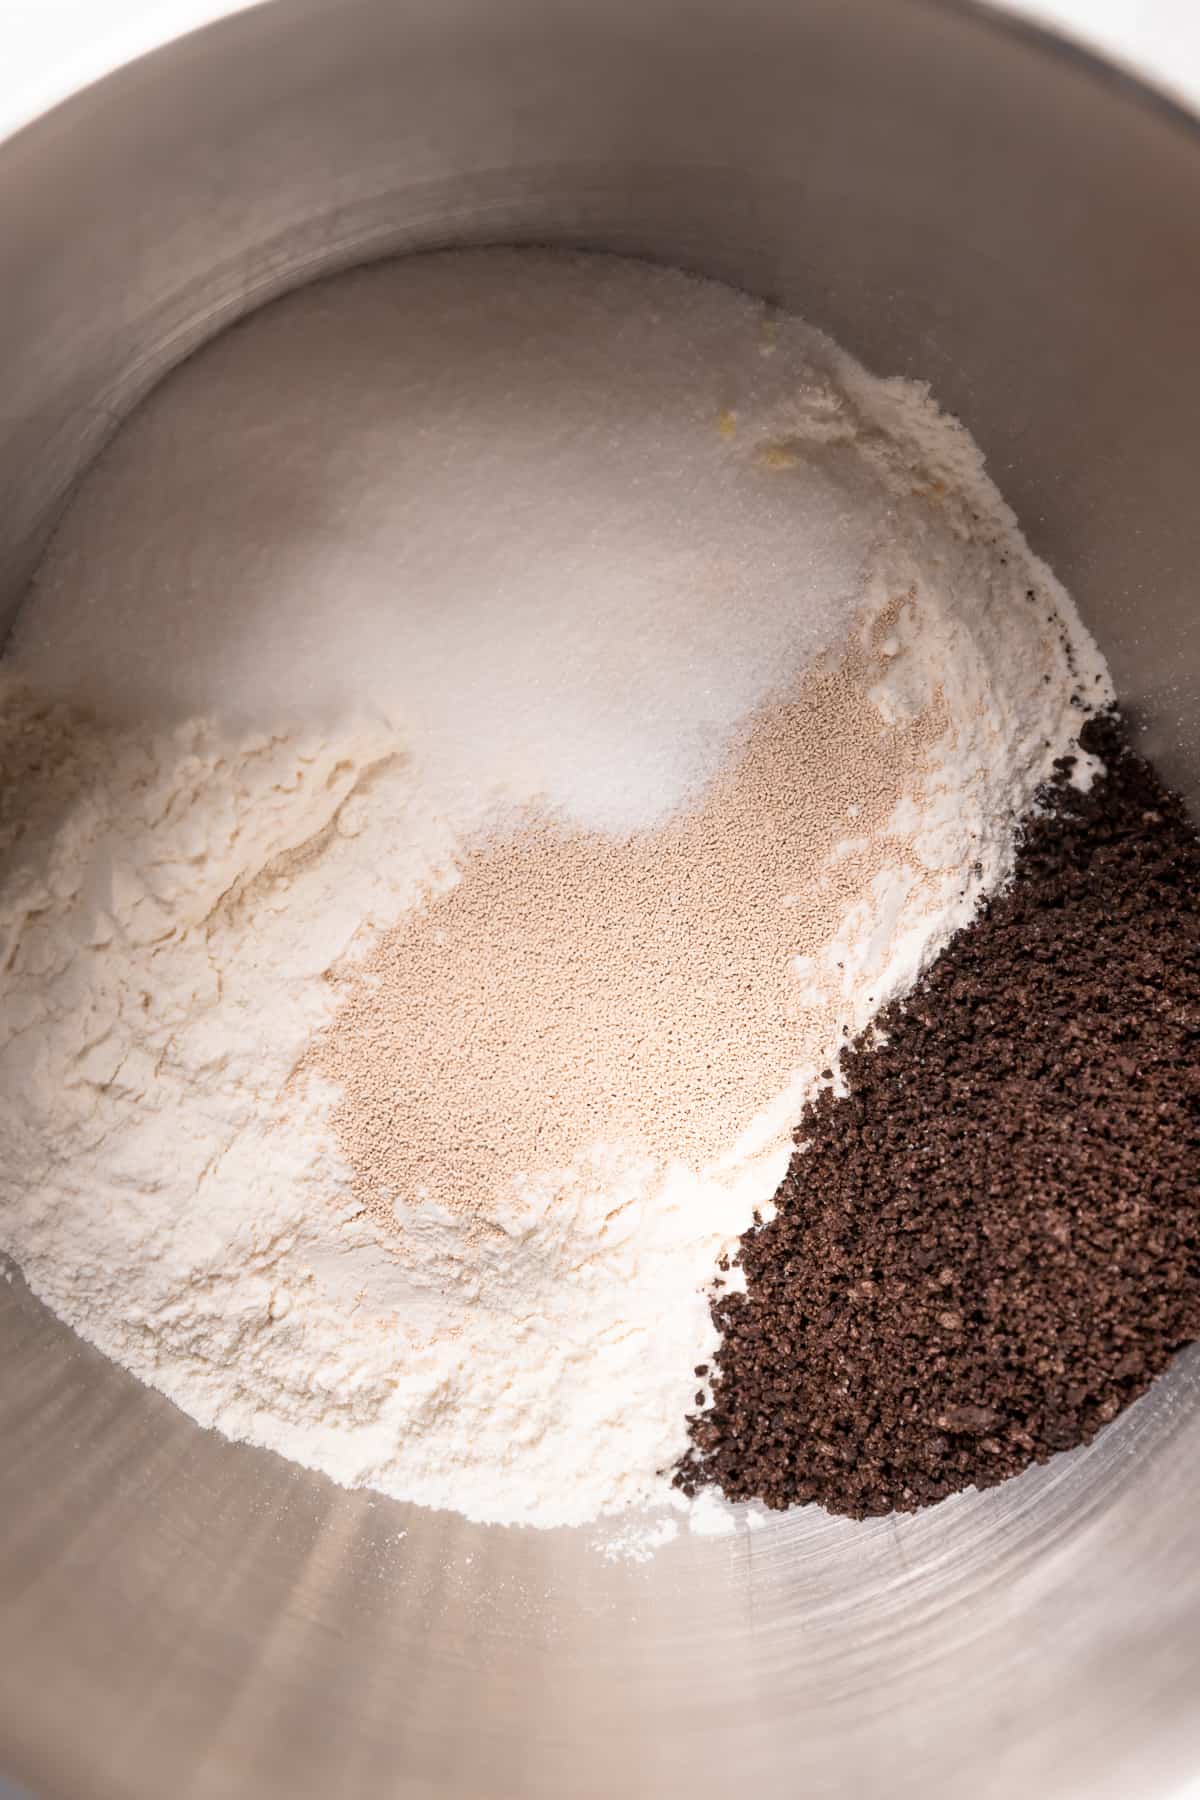 flour, oreo crumbs, yeast, and sugar in a mixing bowl.